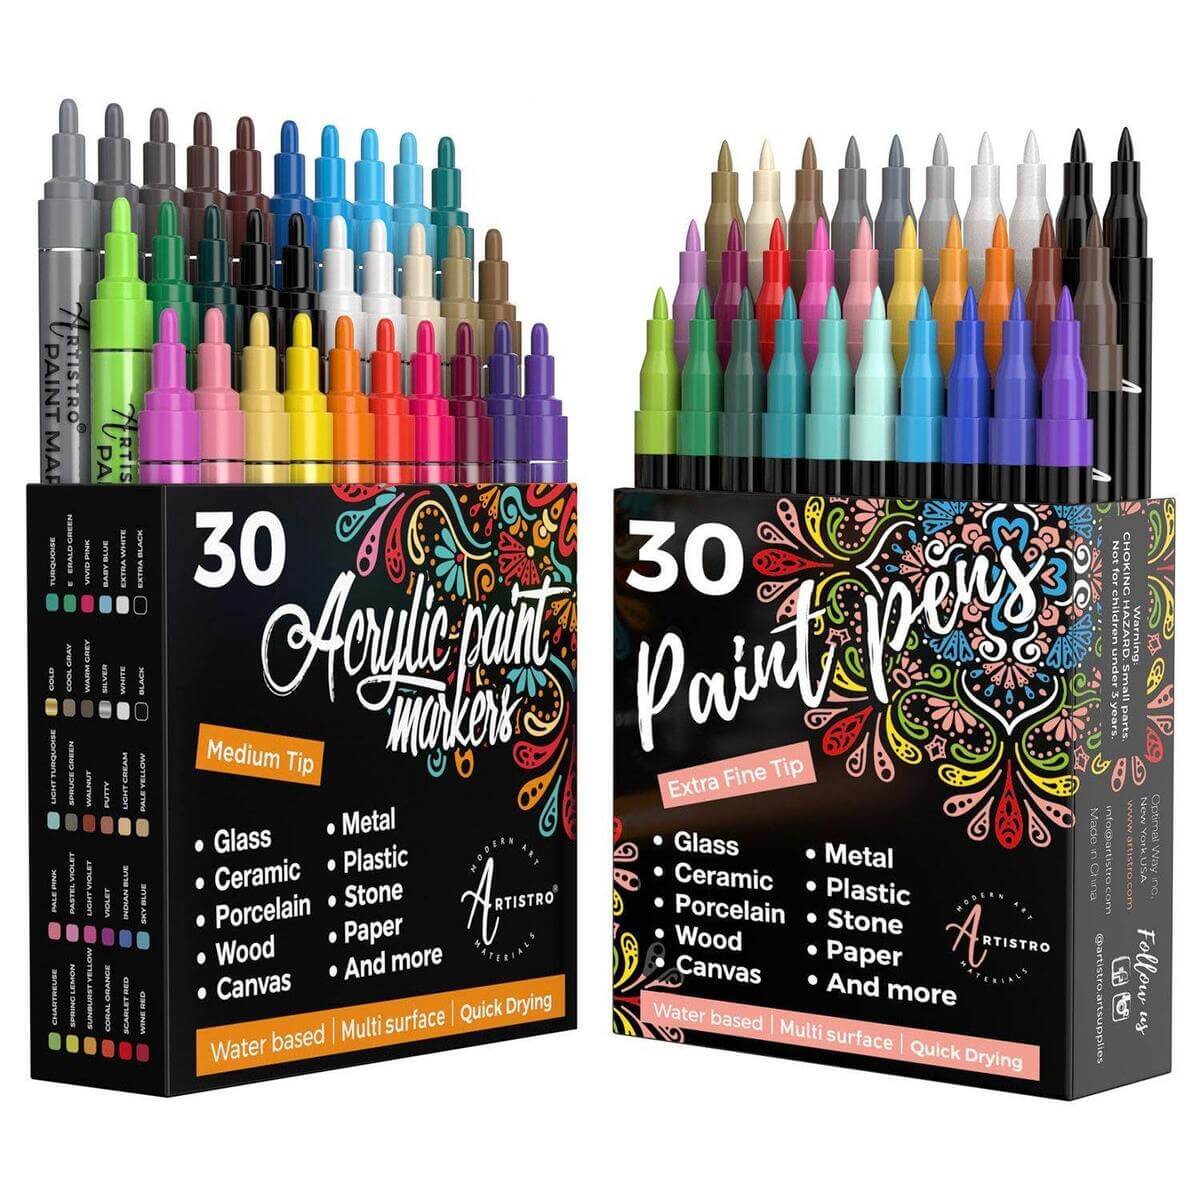 http://artistro.com/cdn/shop/products/60-markers-for-art-30-acrylic-extra-fine-tip-paint-pens-30-acrylic-medium-tip-paint-pens-for-rock-wood-glass-ceramic-metal-painting-224552.jpg?v=1639066749